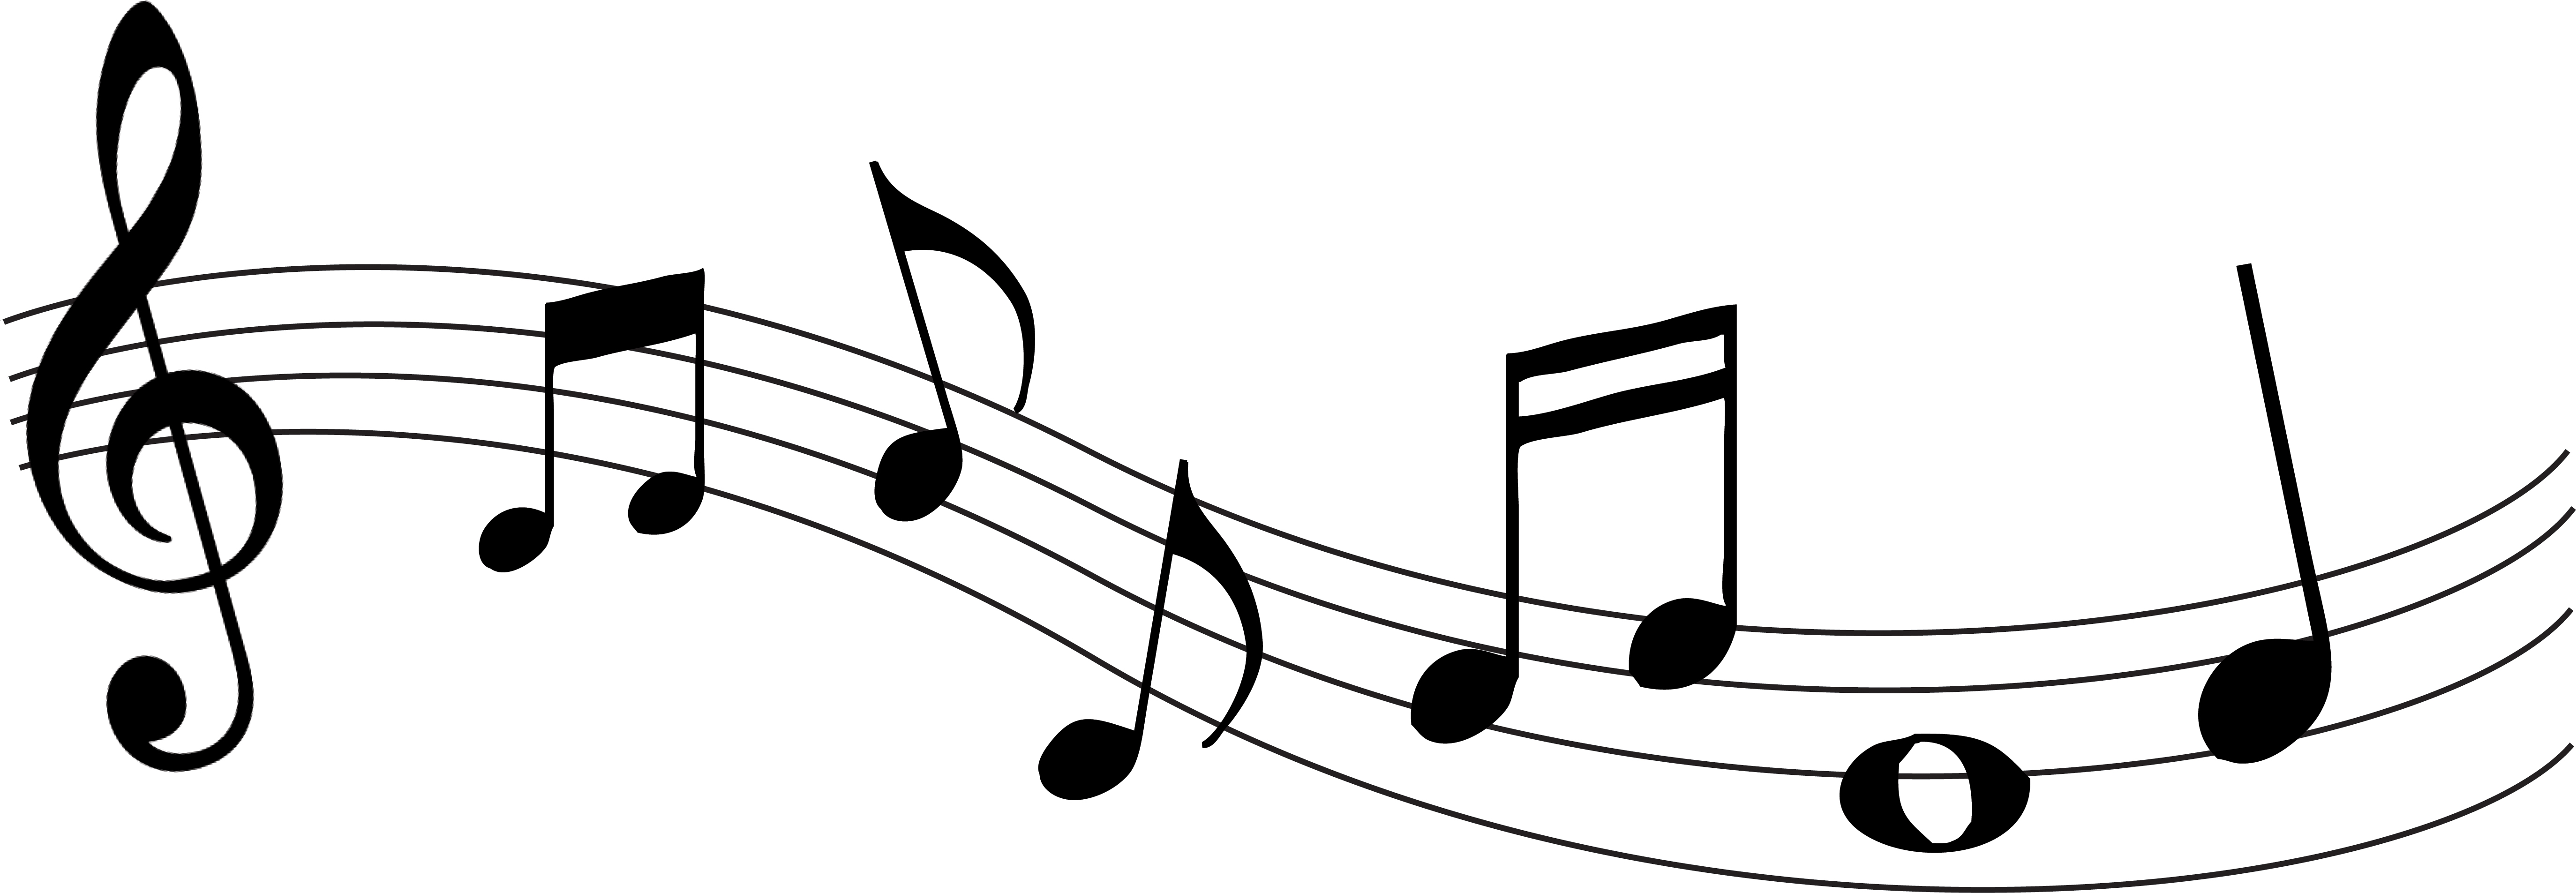 Free Music Notes, Download Free Clip Art, Free Clip Art on